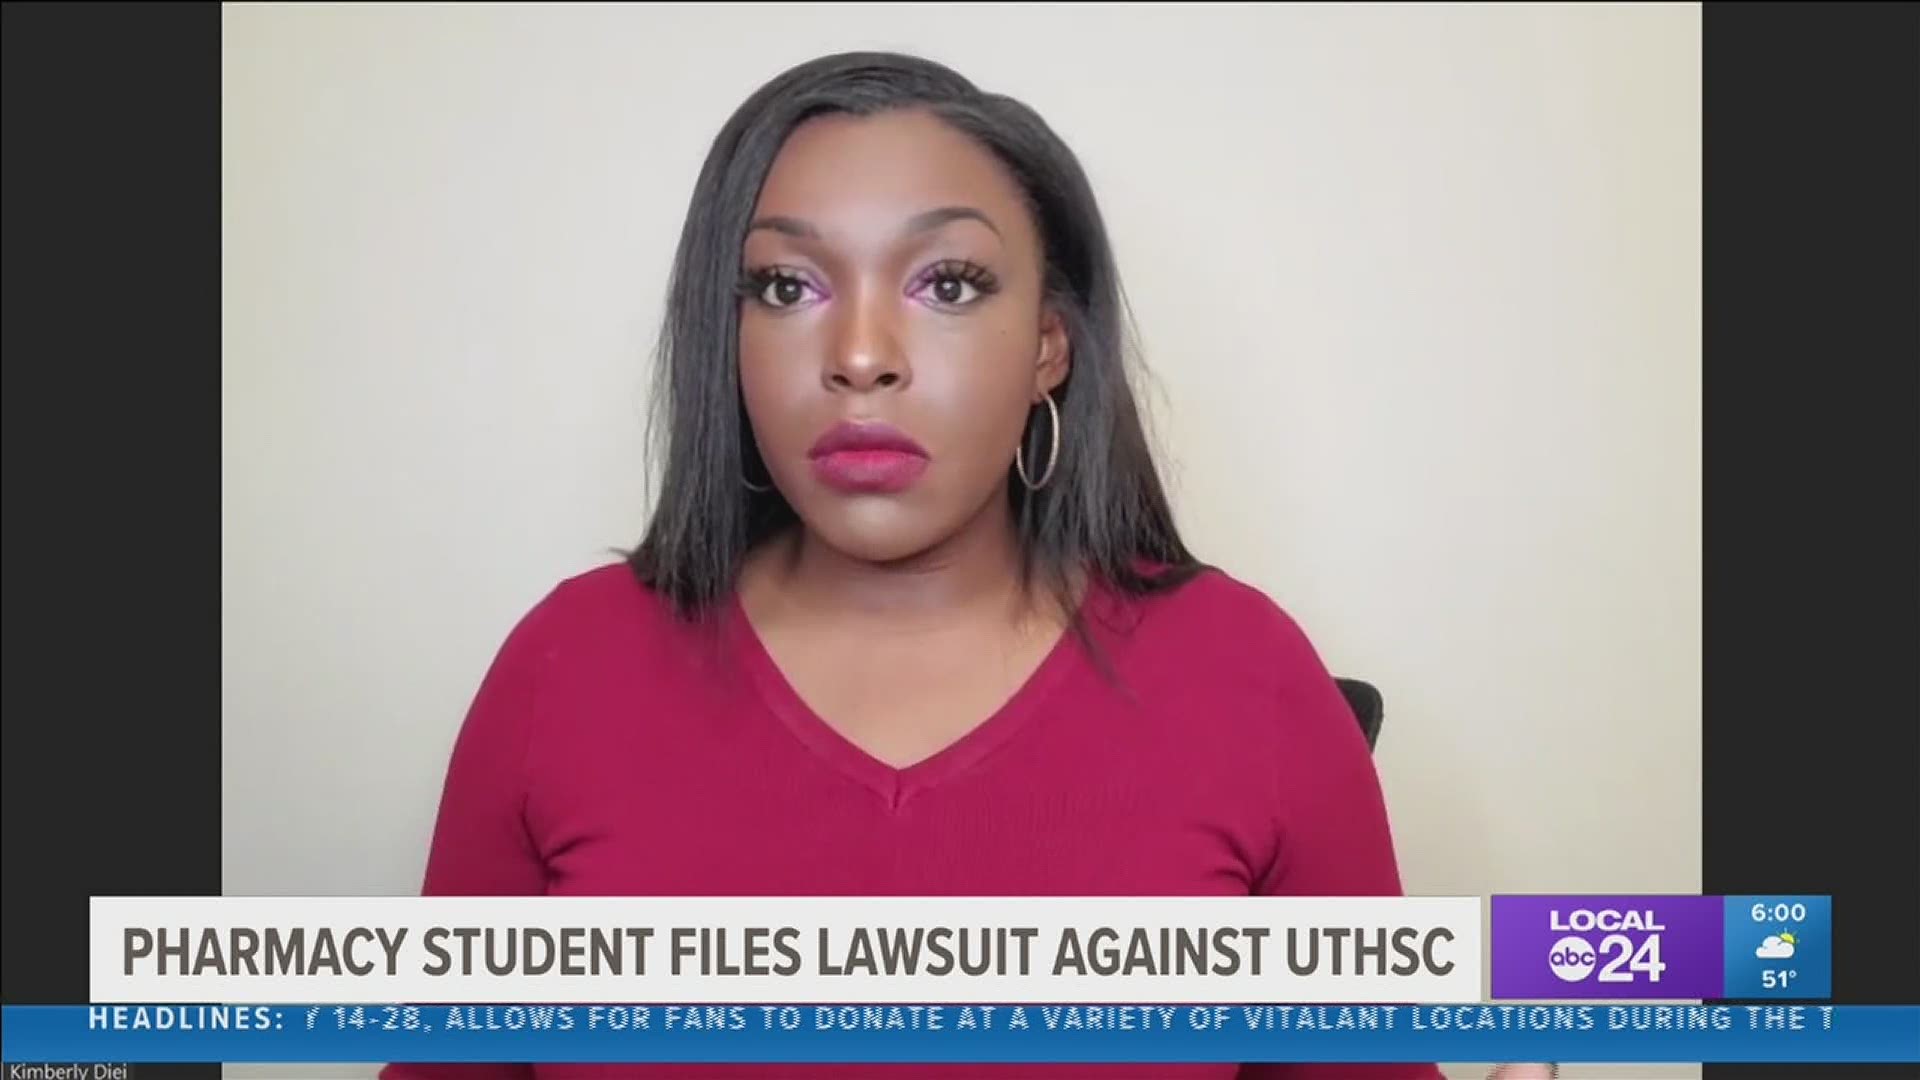 The freedom of speech lawsuit claims UTHSC said the posts were too crude and sexual.